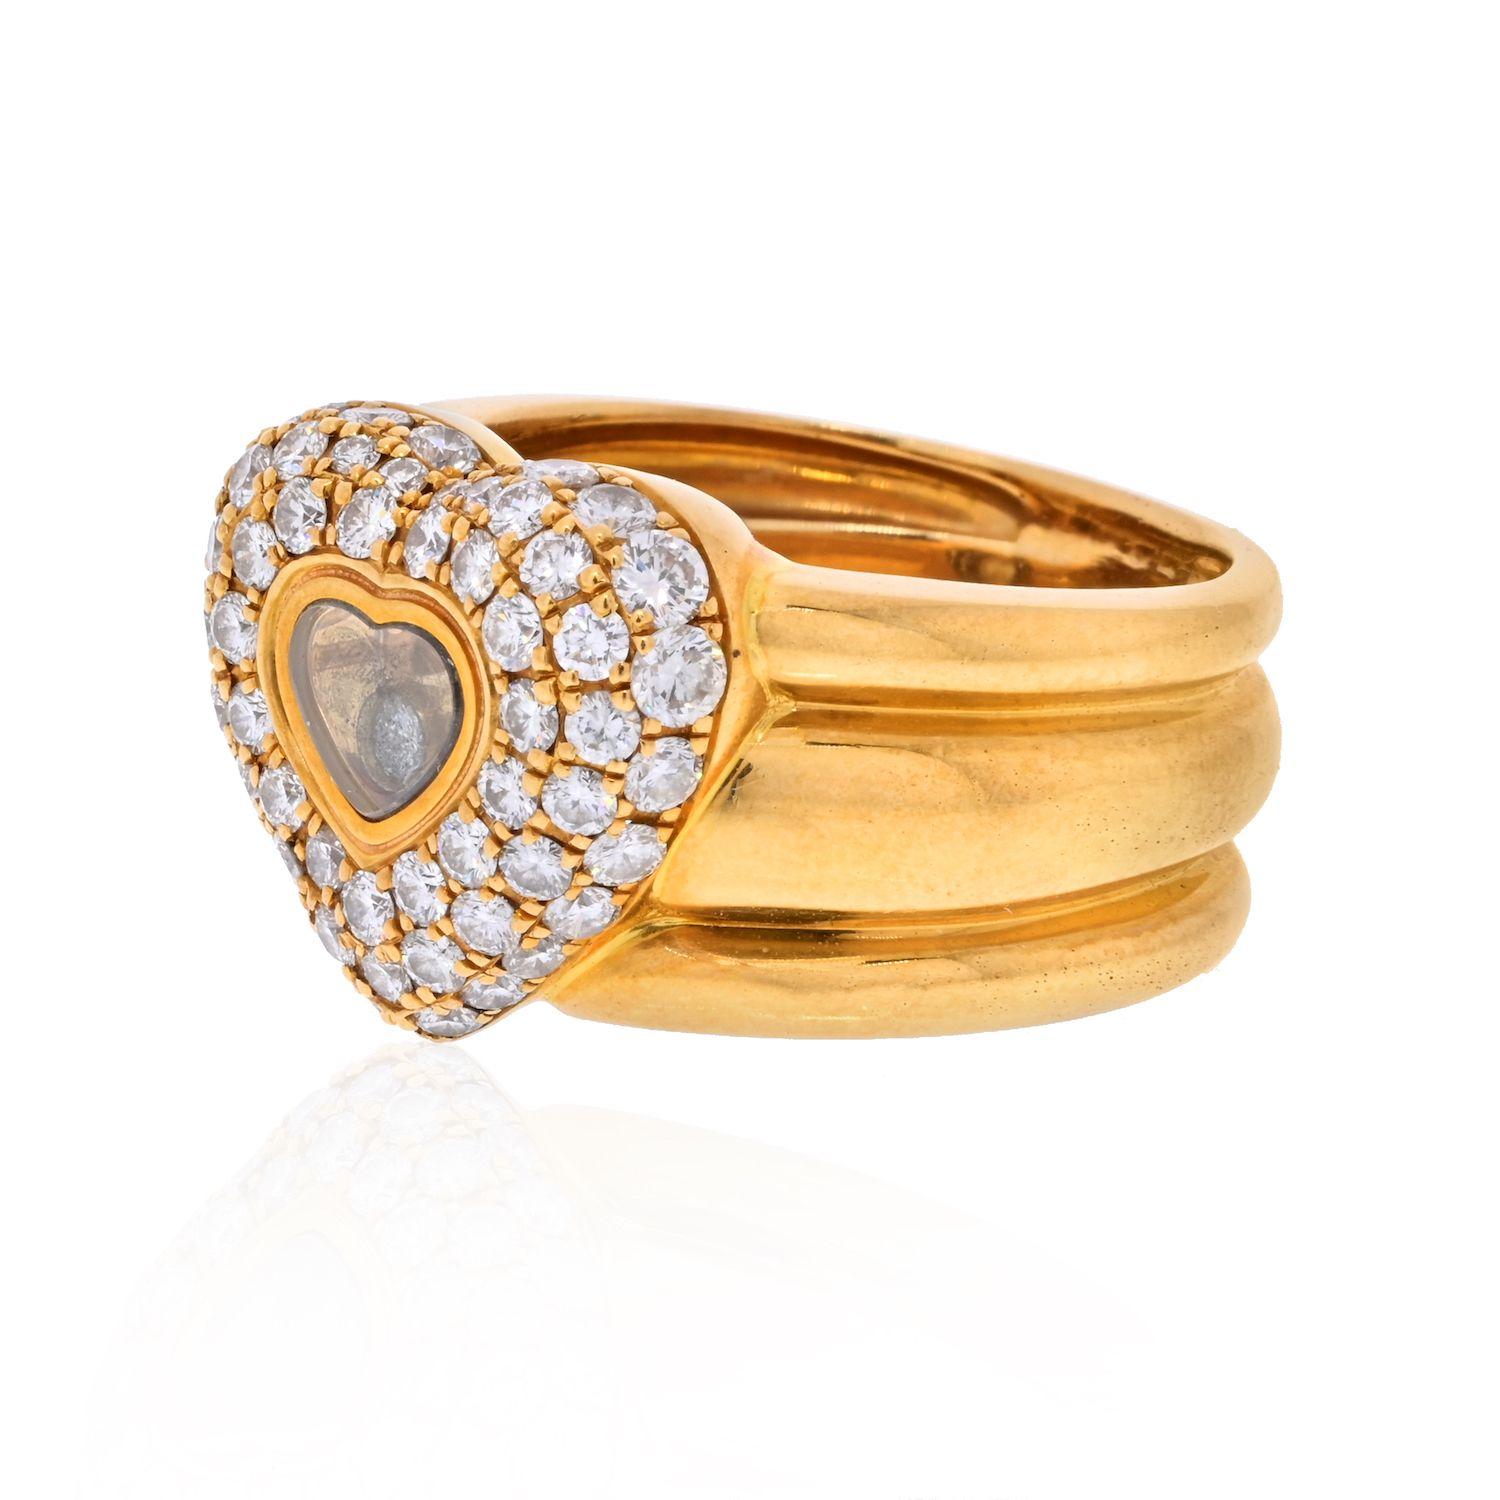  This vintage Chopard 18K Yellow Gold Pave Heart Shape Floating Diamond Ring is mounted with one diamond behind the crystal and round cut pave set diamonds in three rows around the center heart frame 0.59cttw.
Ring will be given a nice polish before